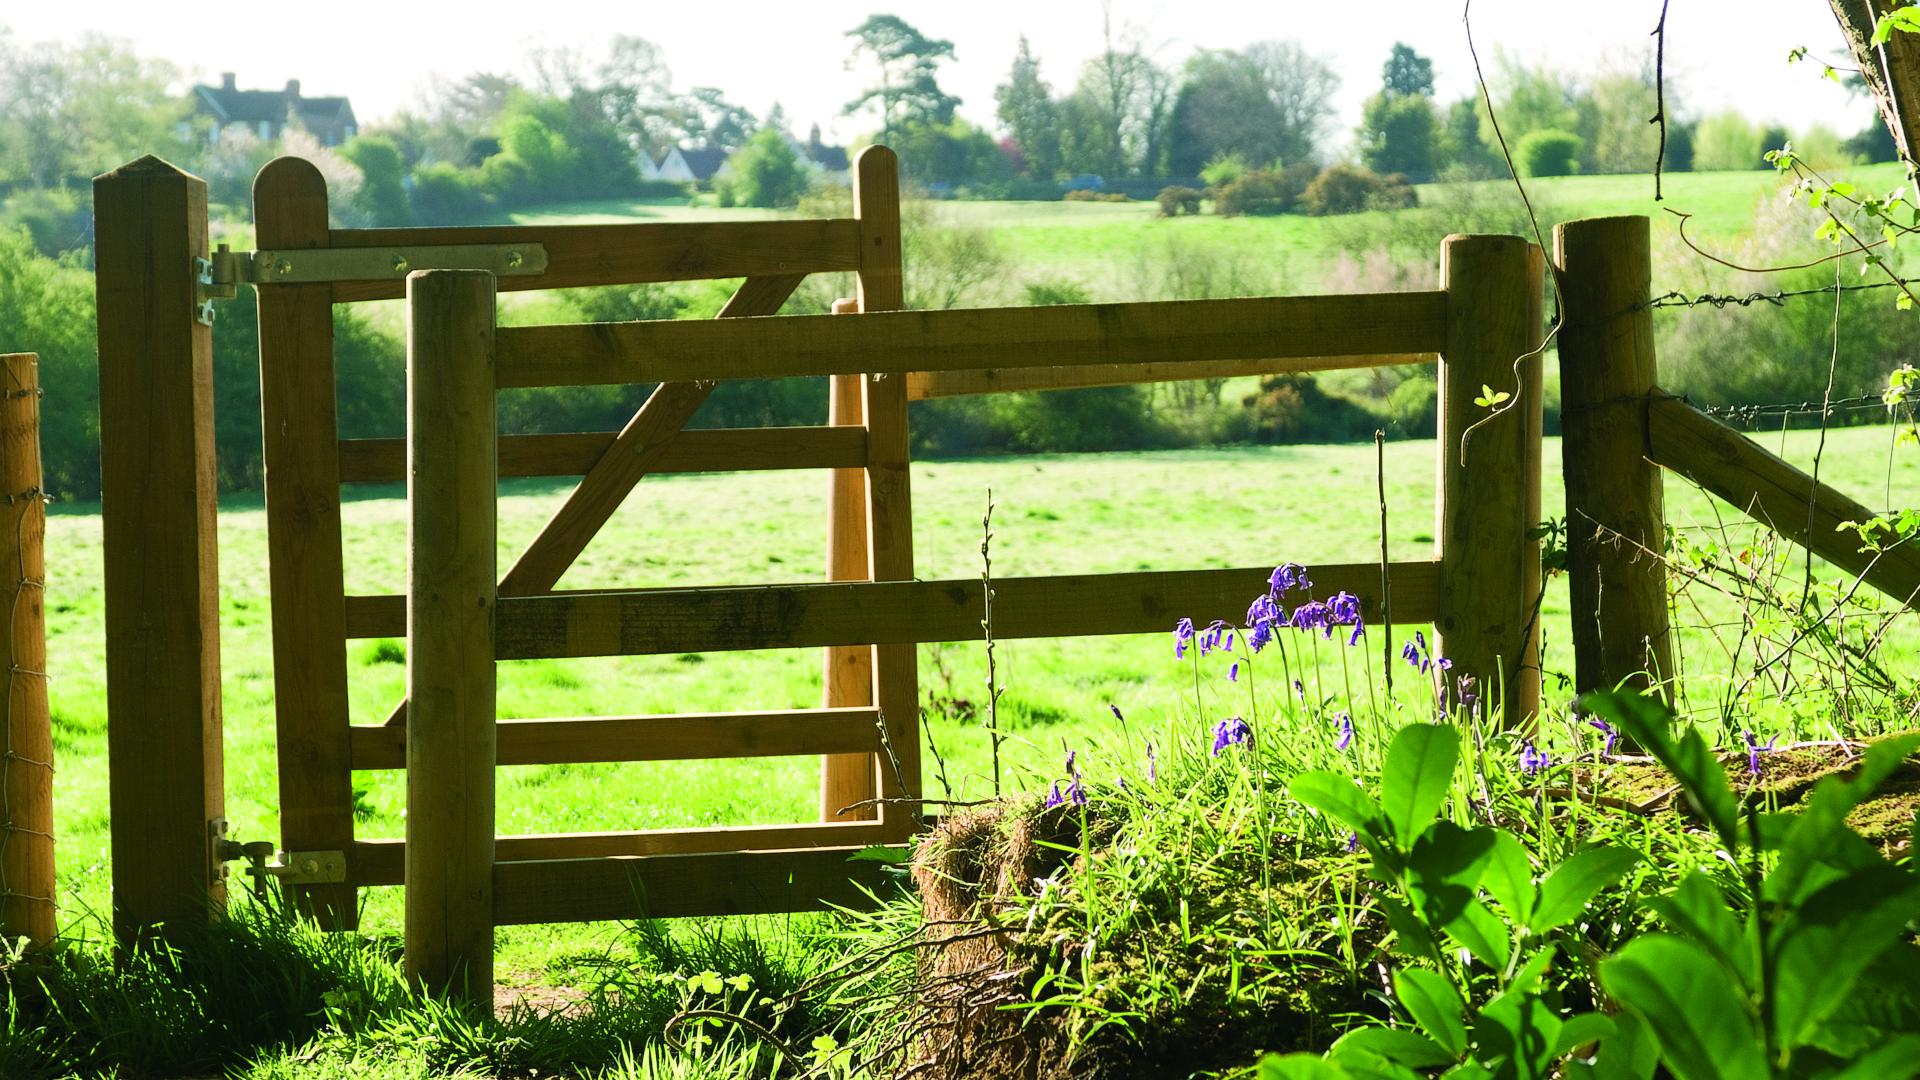 A wooden gate in a green space